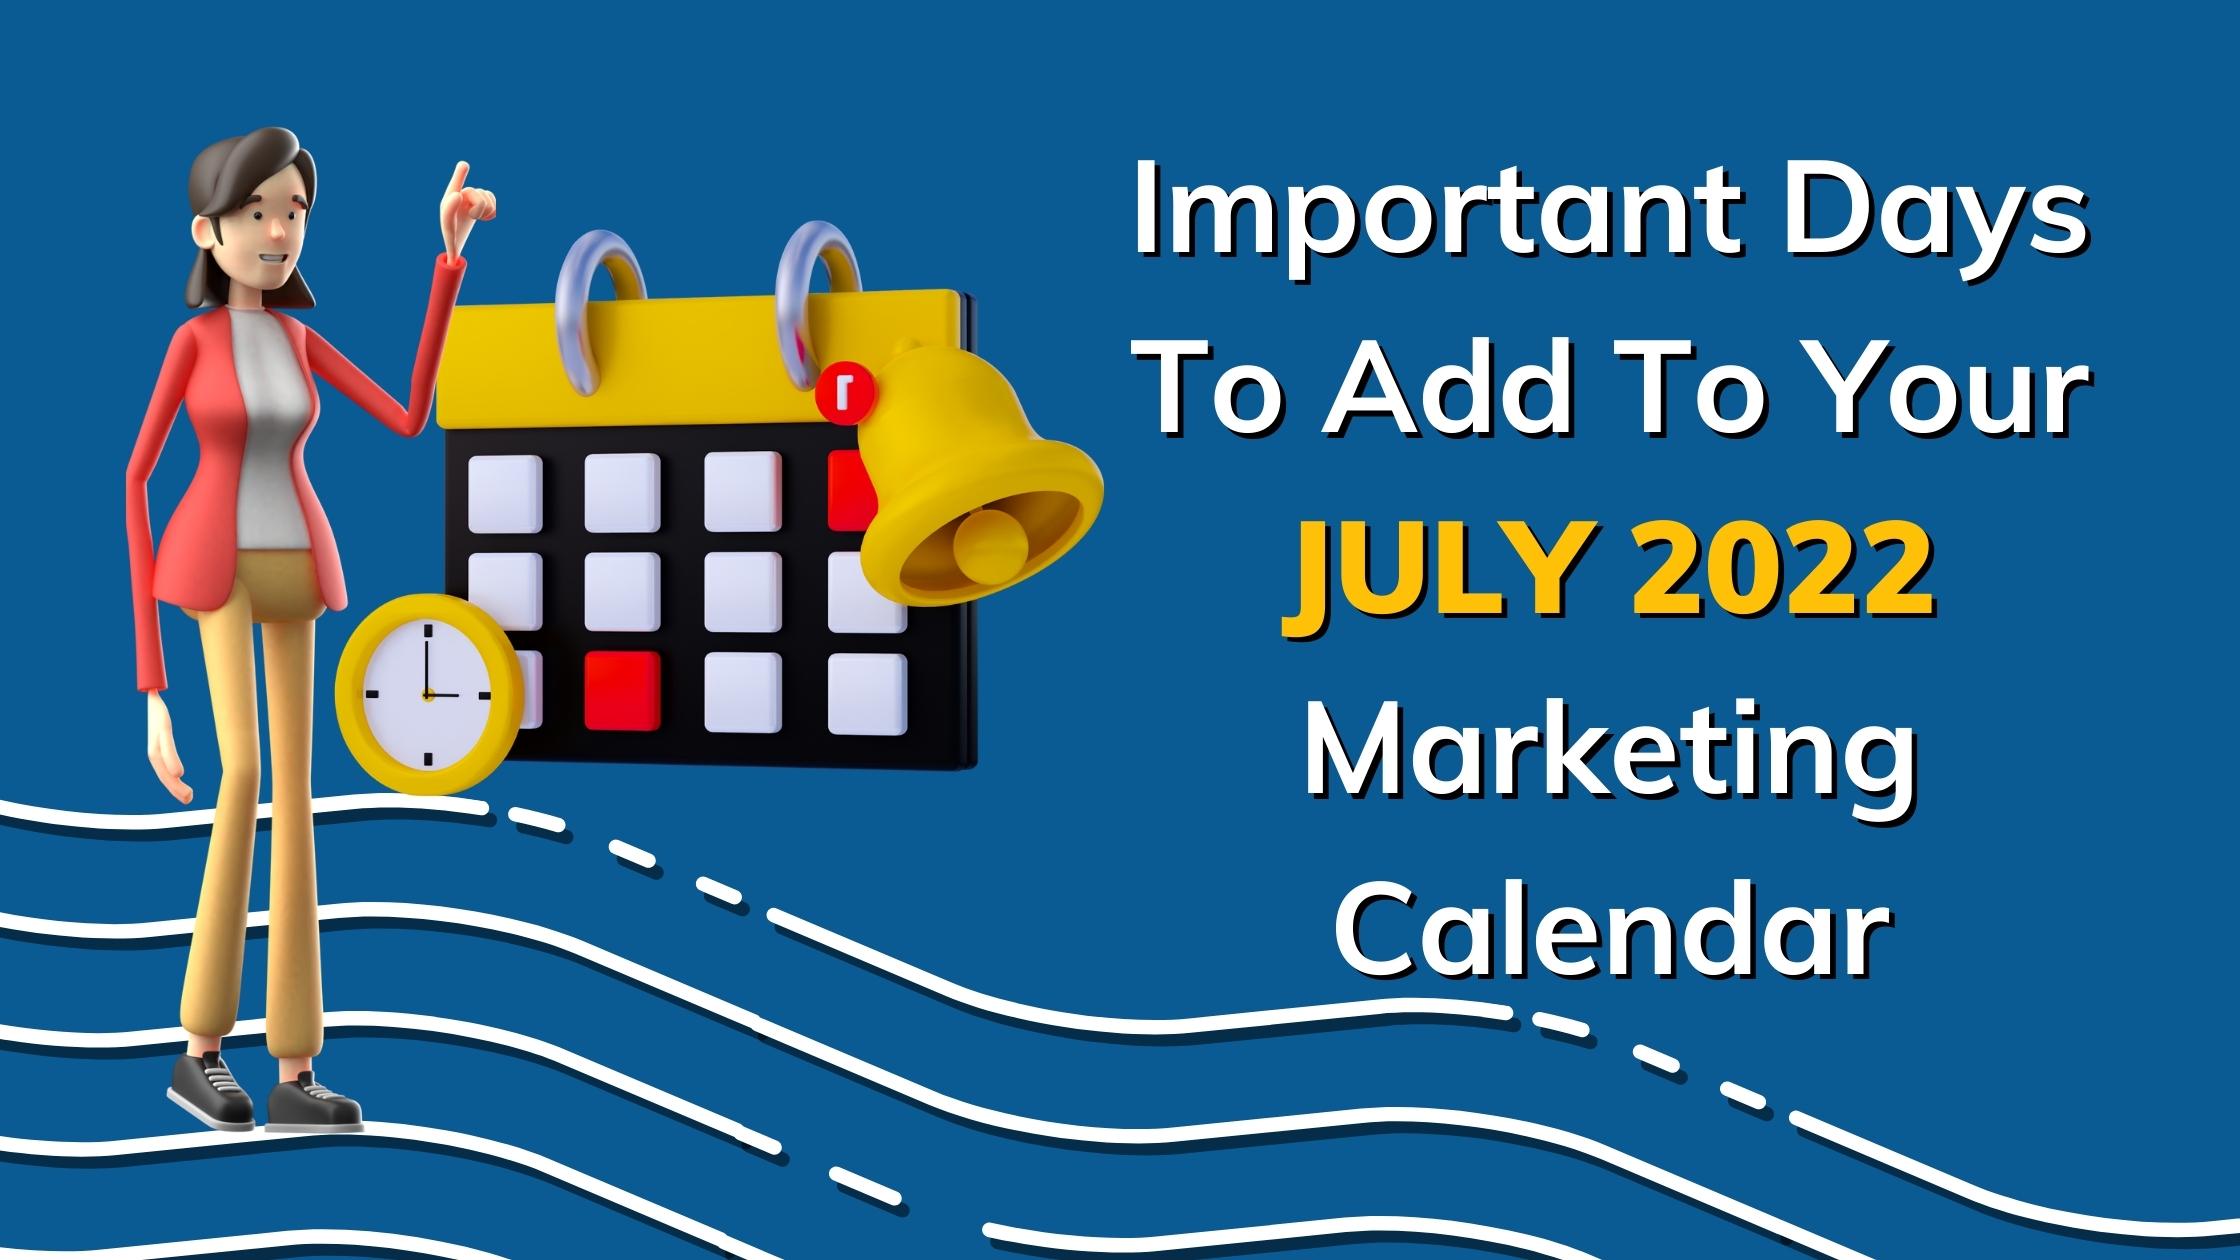 Important Days To Add To Your July 2022 Marketing Calendar